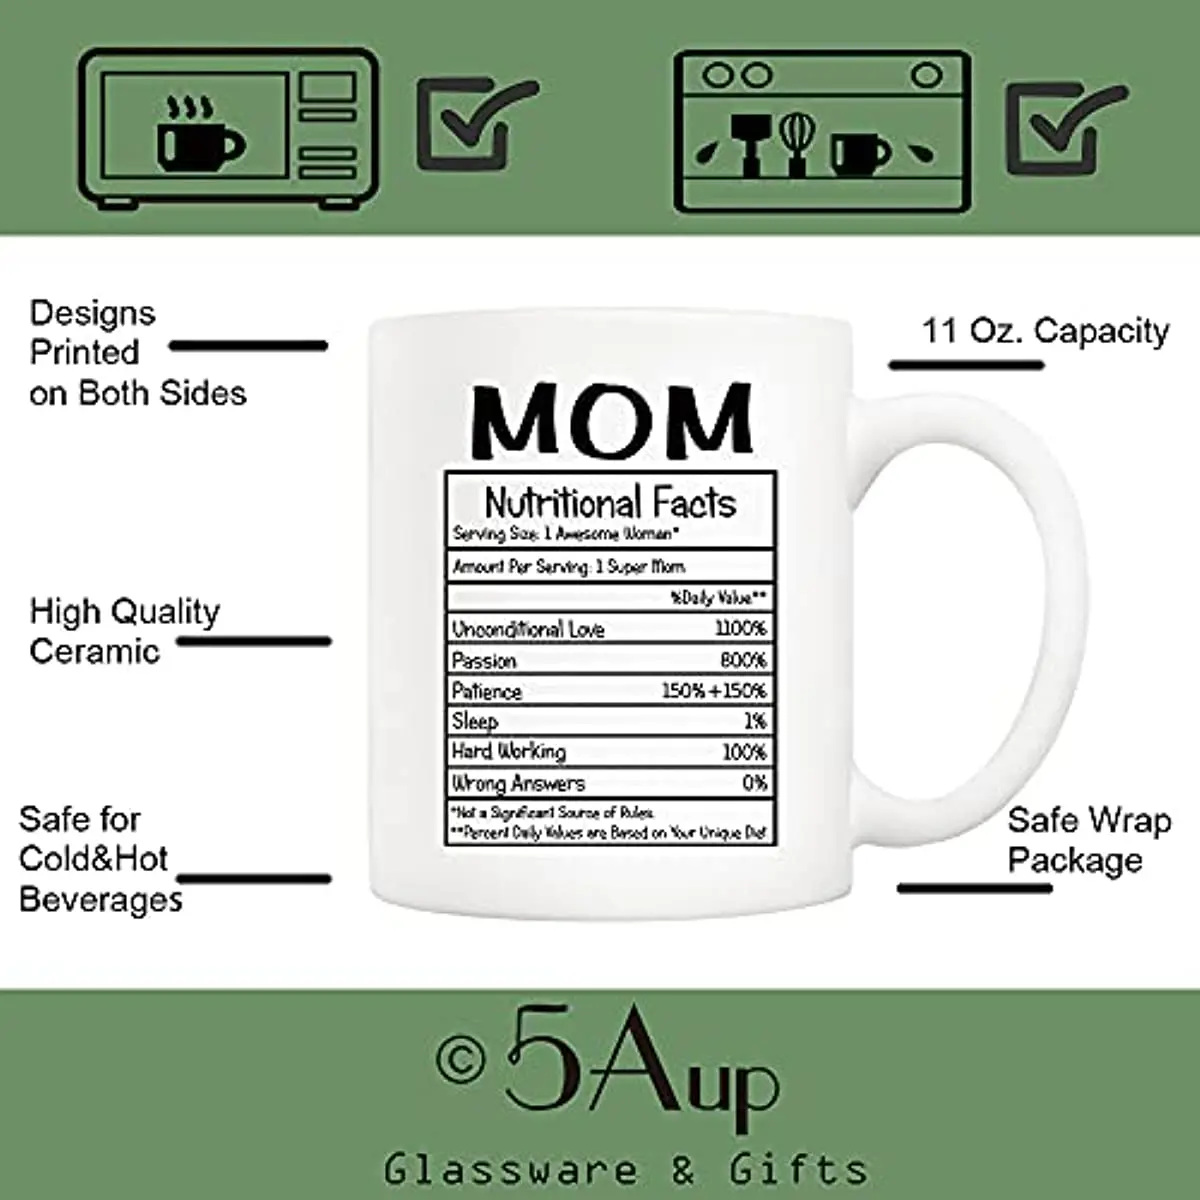 https://ae01.alicdn.com/kf/S743d1ccd11fb405fb2cd7cbc5d78b0f3j/Mothers-Day-Christmas-Gifts-Mom-Nutritional-Facts-Coffee-Mug-Funny-Novelty-Gift-from-Child-Daughter-11Oz.jpg